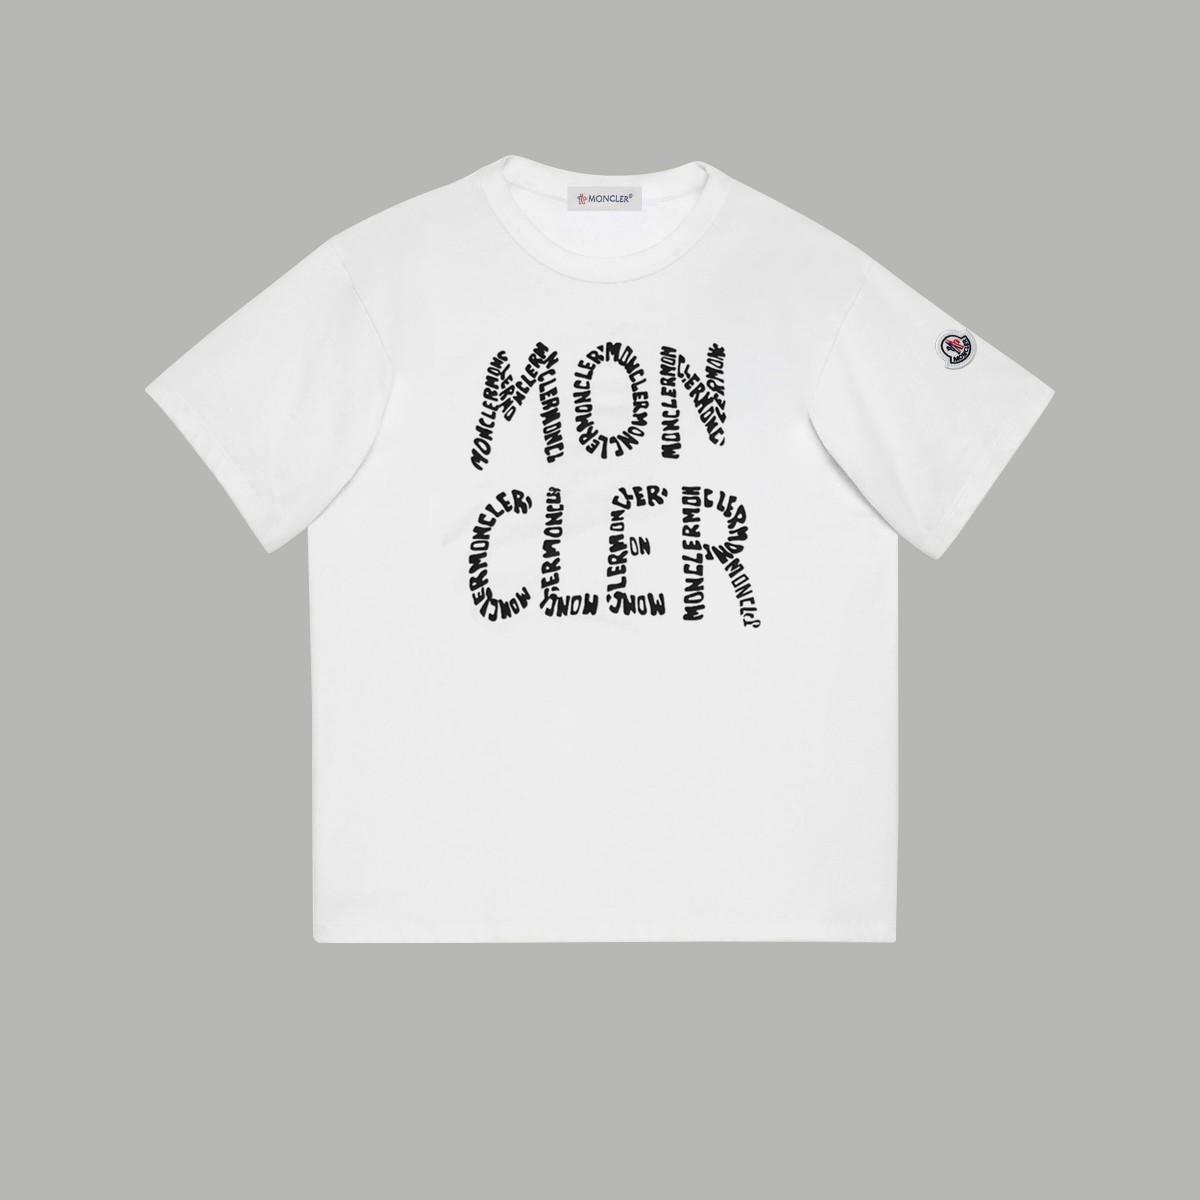 Moncler Clothing T-Shirt Embroidery Unisex Cotton Spring/Summer Collection Short Sleeve